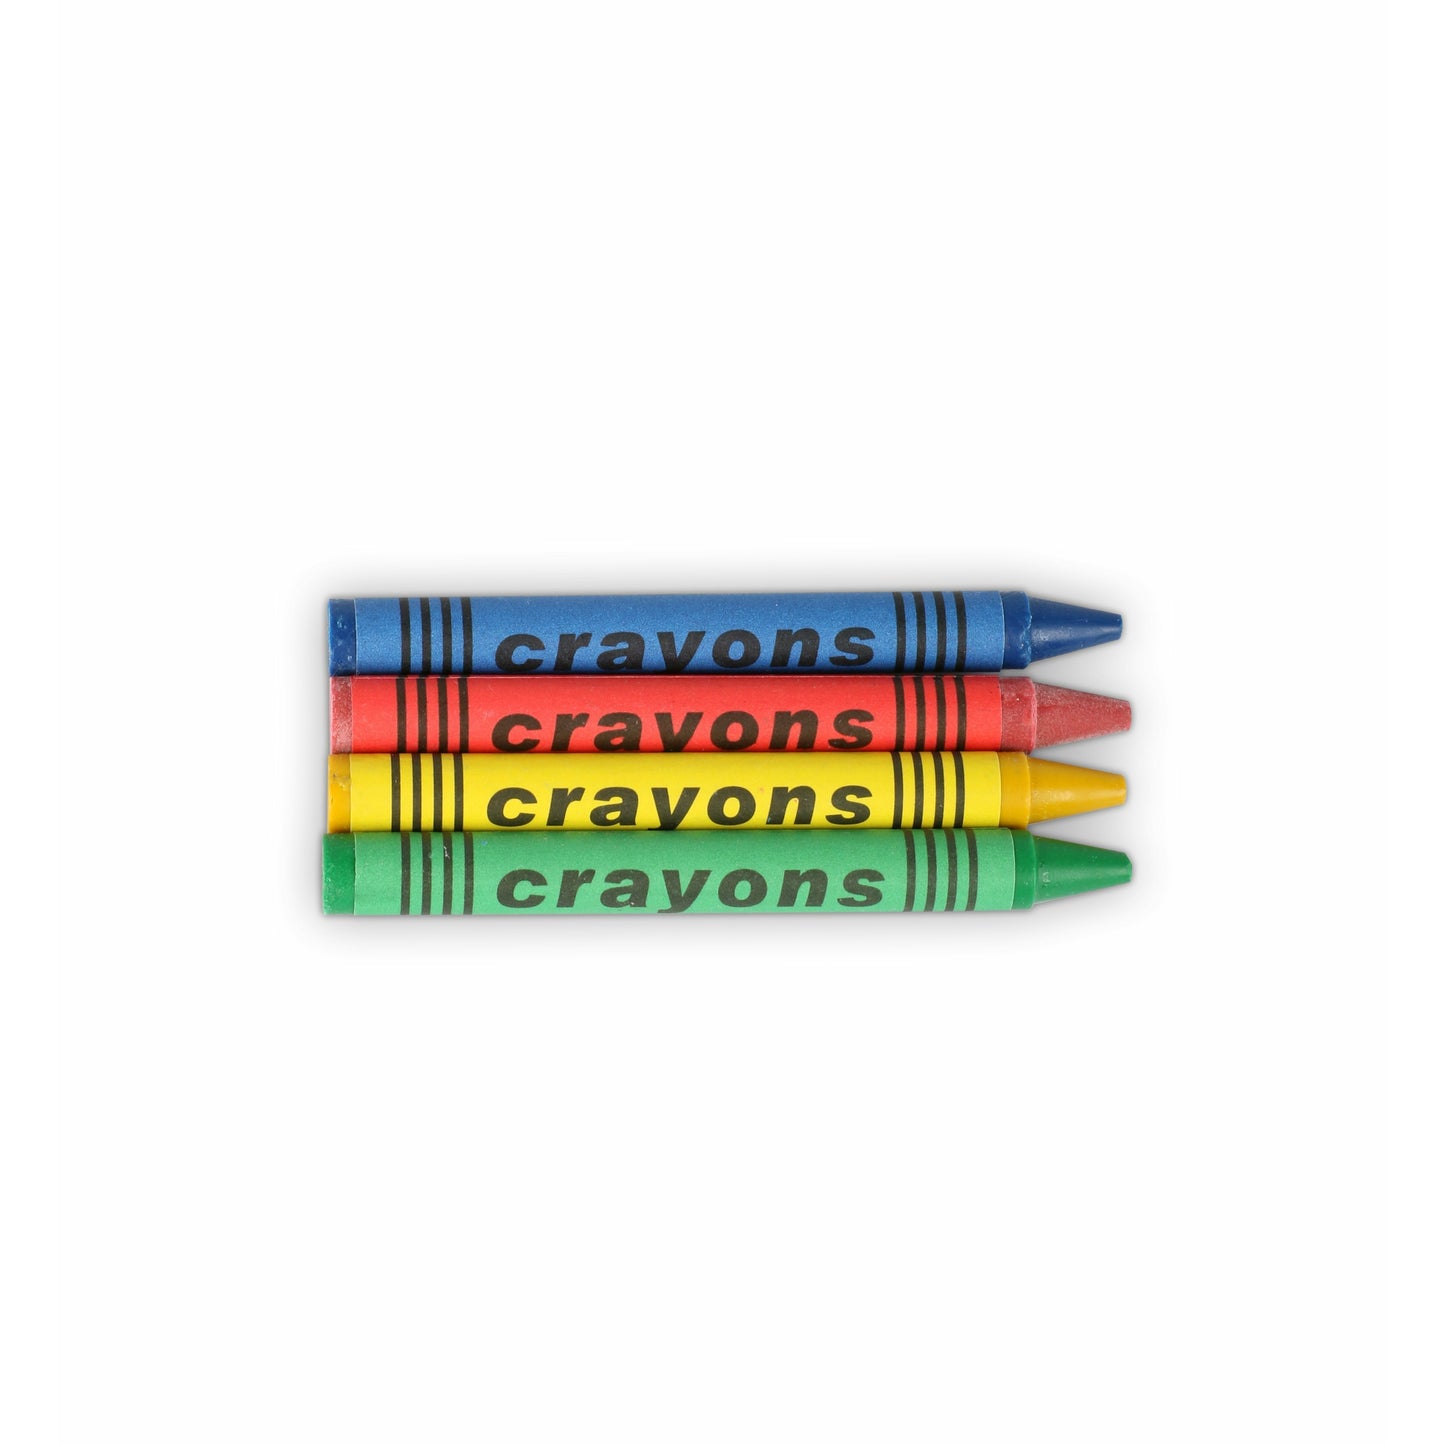 Pack of 12 Boxes of 4 Wax Crayons - 48 Crayons